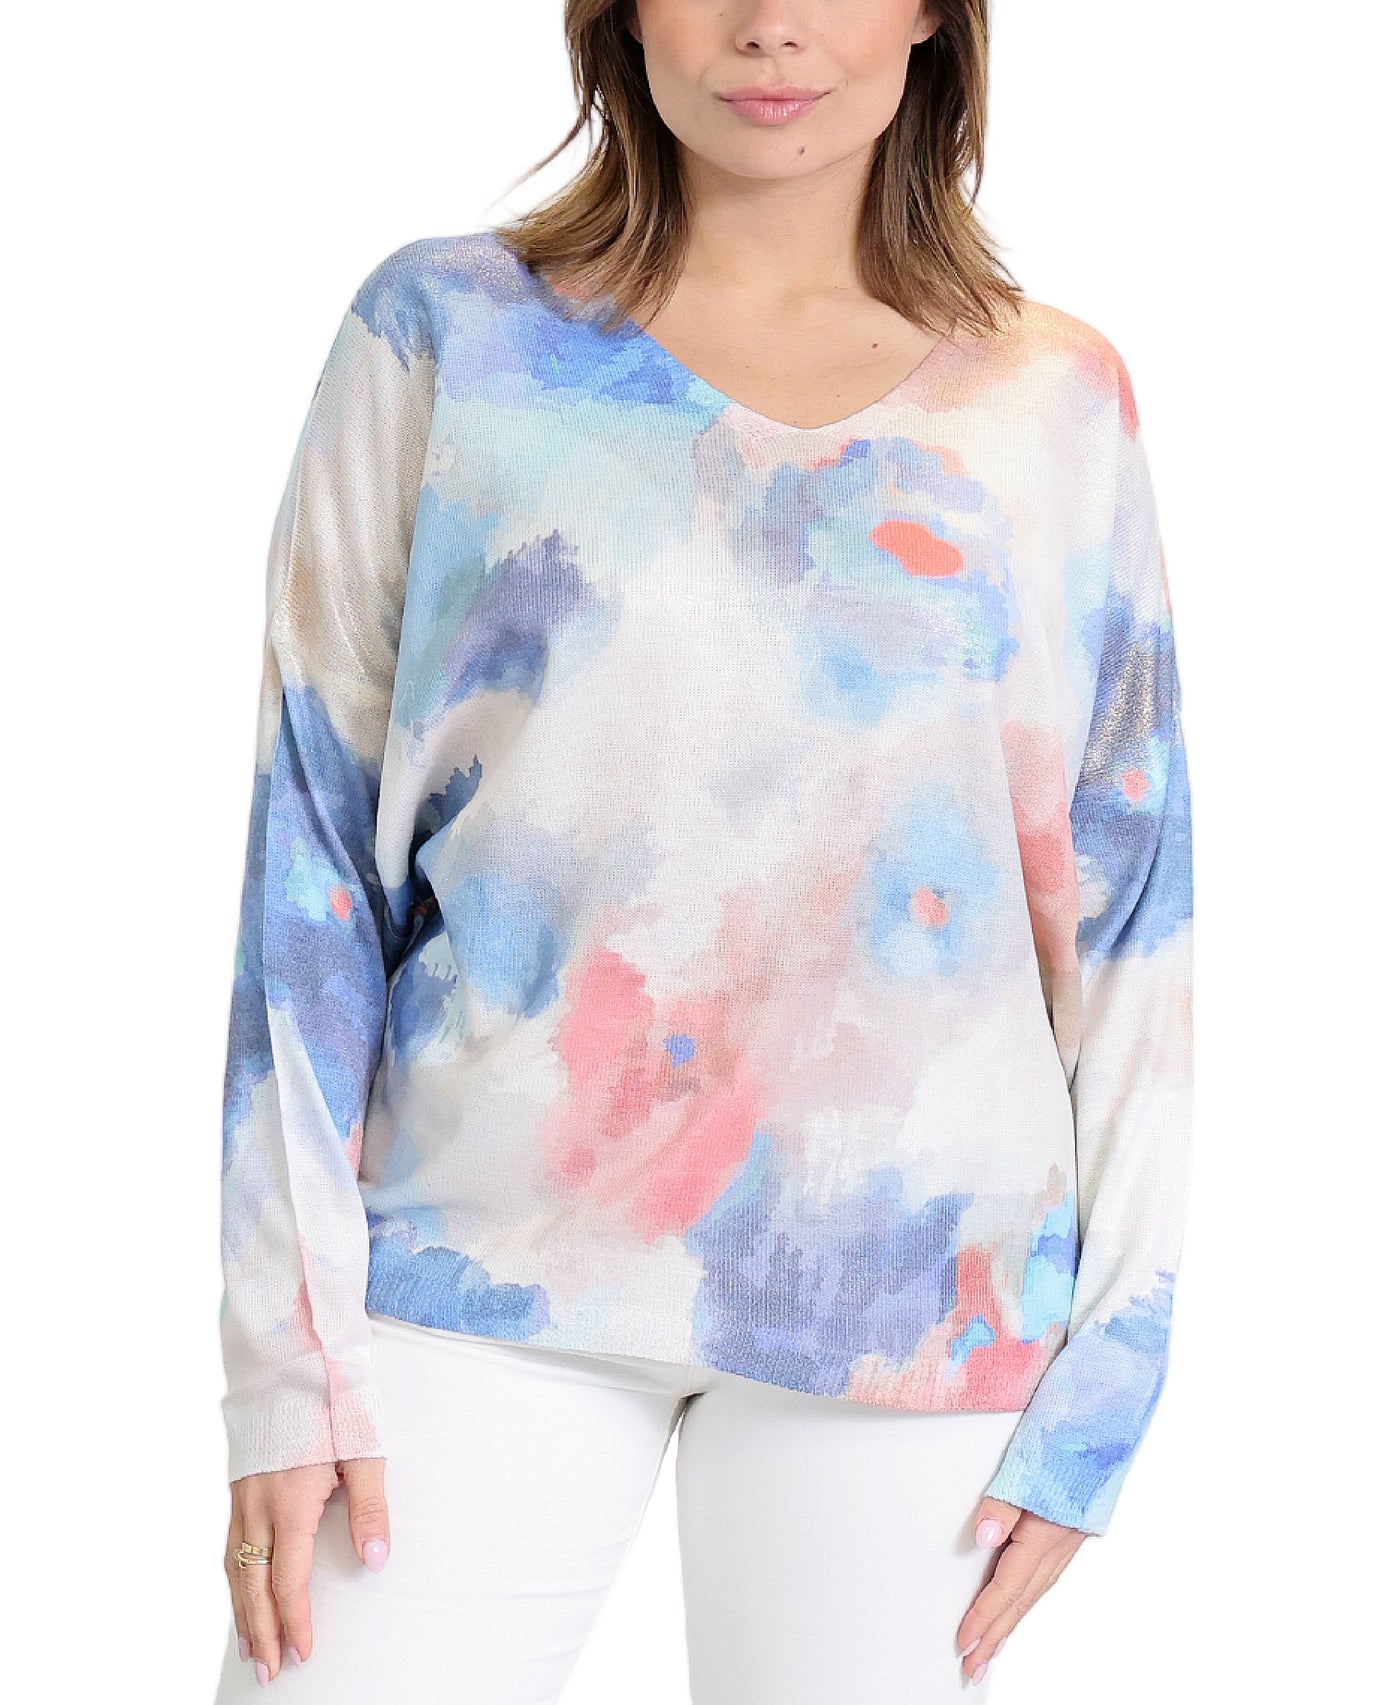 Watercolor Shimmer Knit Top image 1